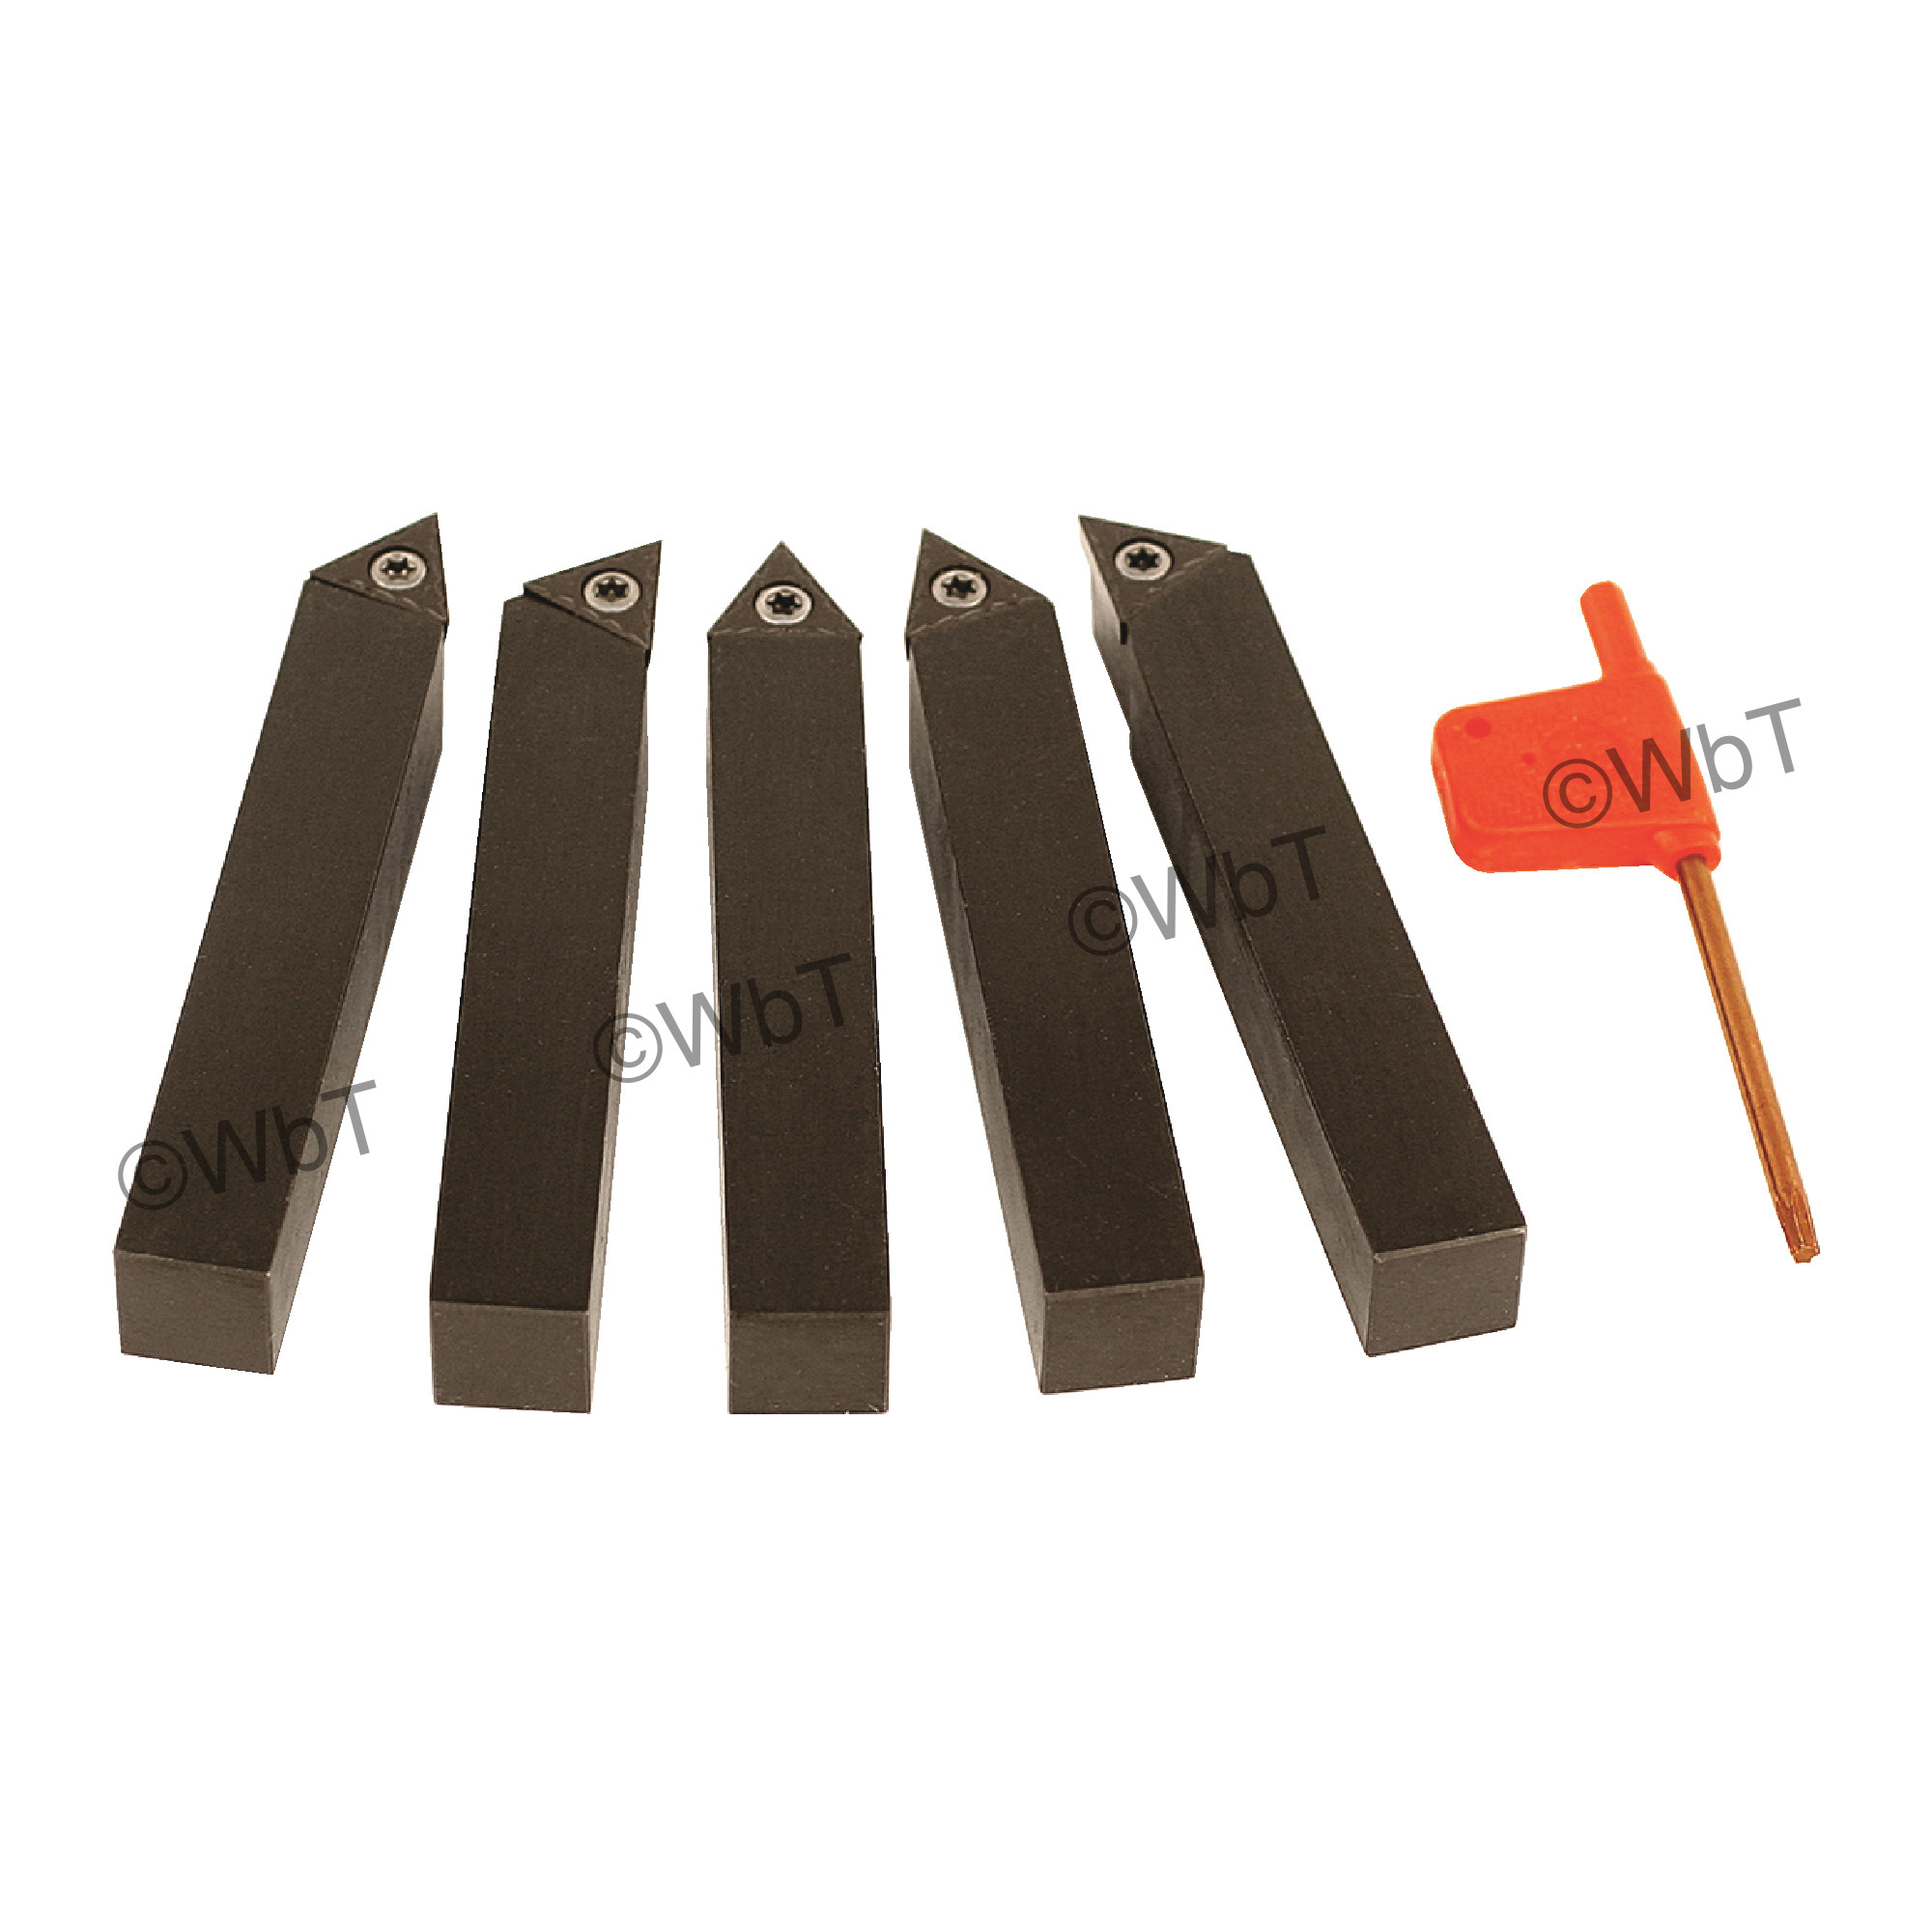 TERRA CARBIDE - 5 Piece External Turning Set with Inserts / Accepts TCMT3(2.5)_ Inserts / 1/2" Shank